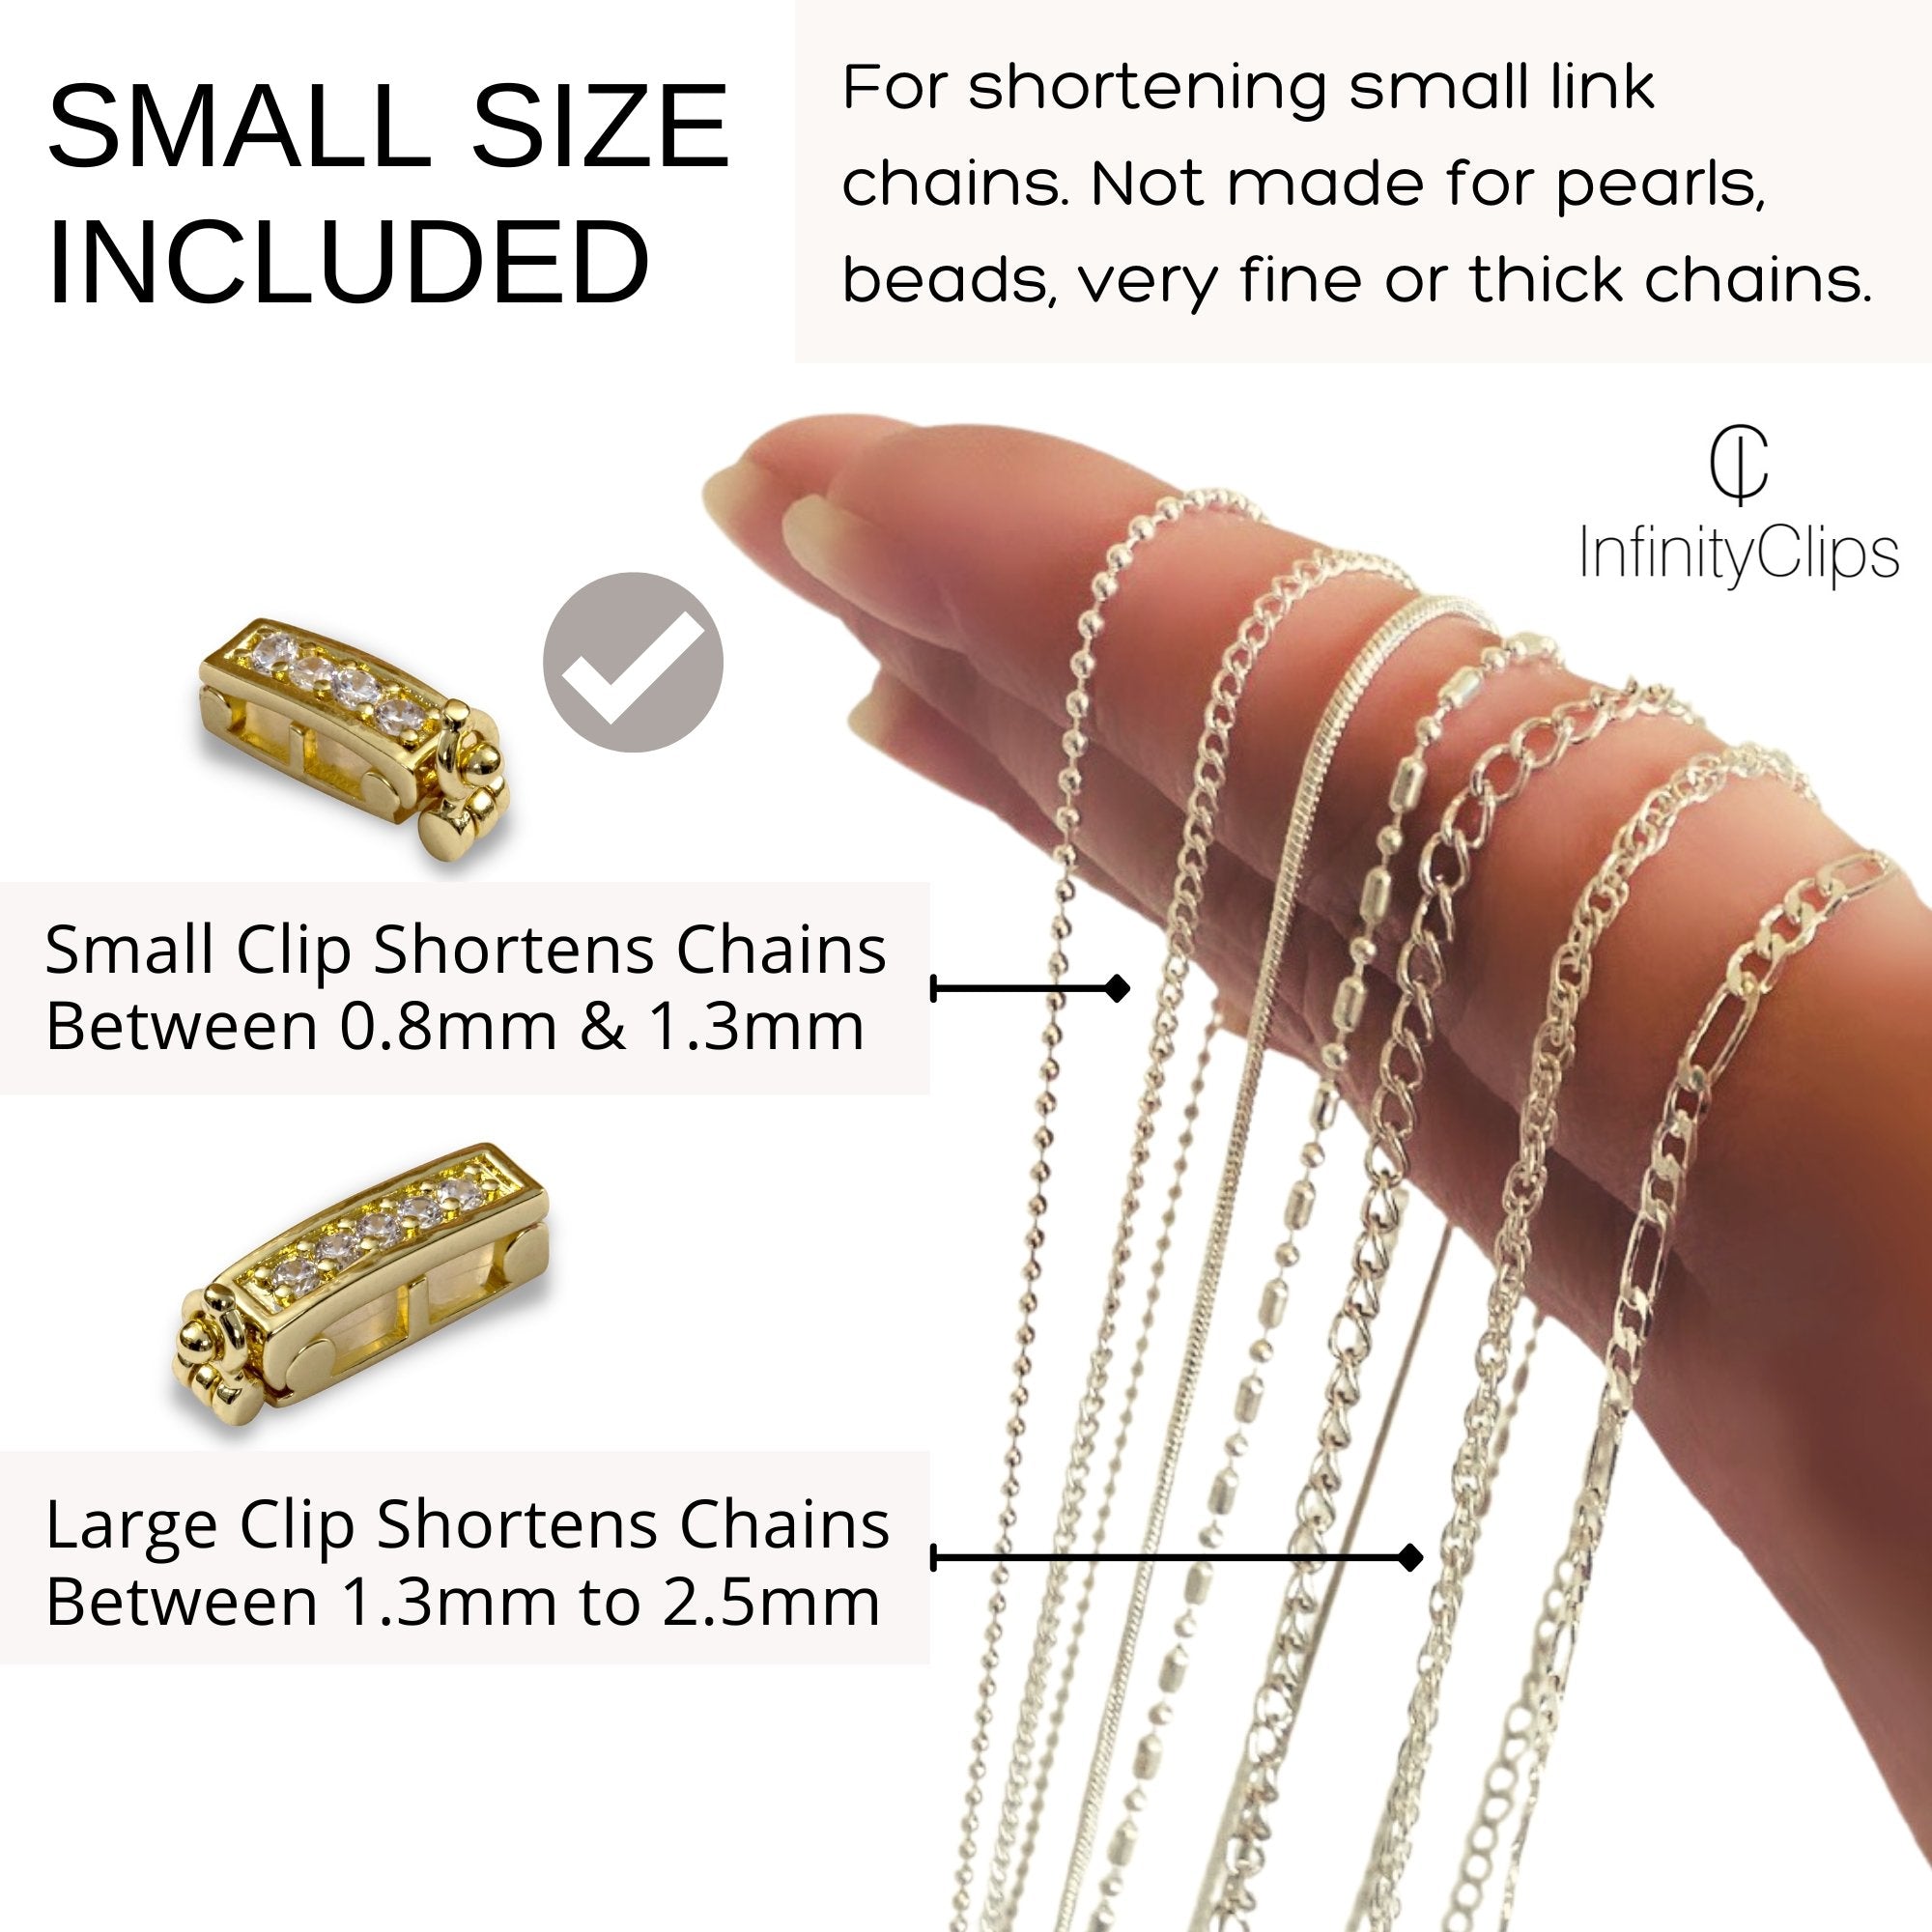 Small Classic Necklace Chain Shortener w/ Clasp (Gold) | InfinityClips